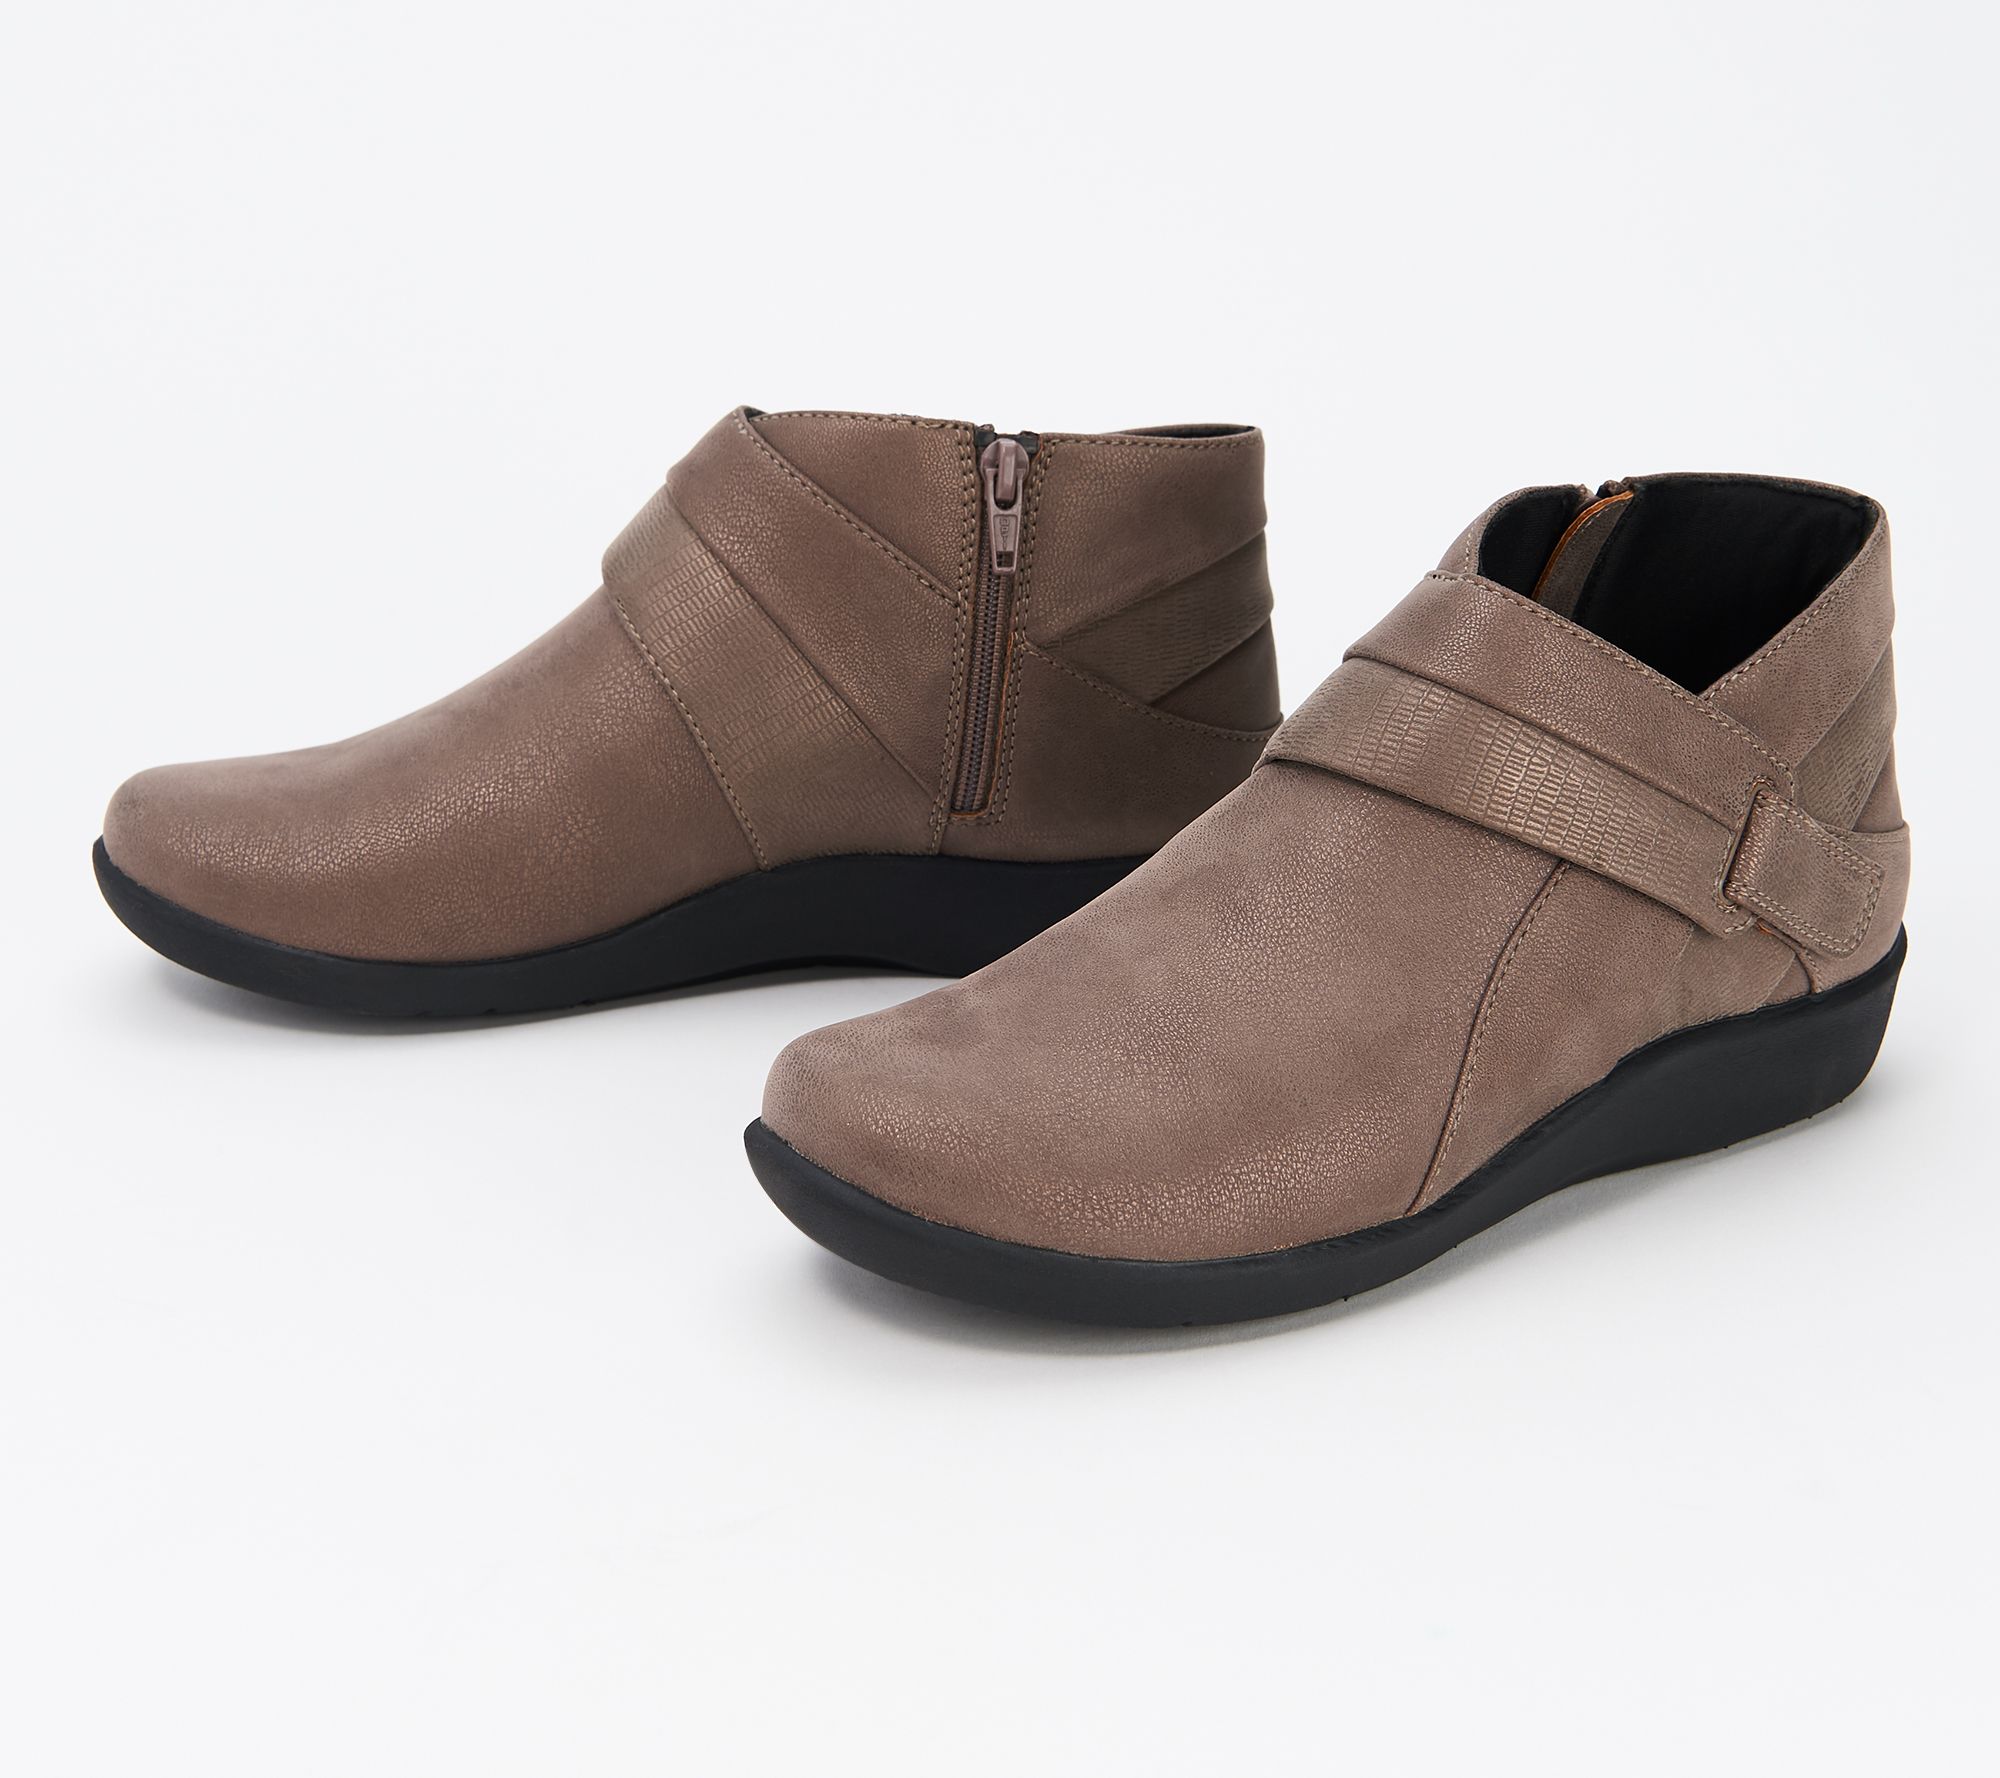 cloudsteppers by clarks ankle boots